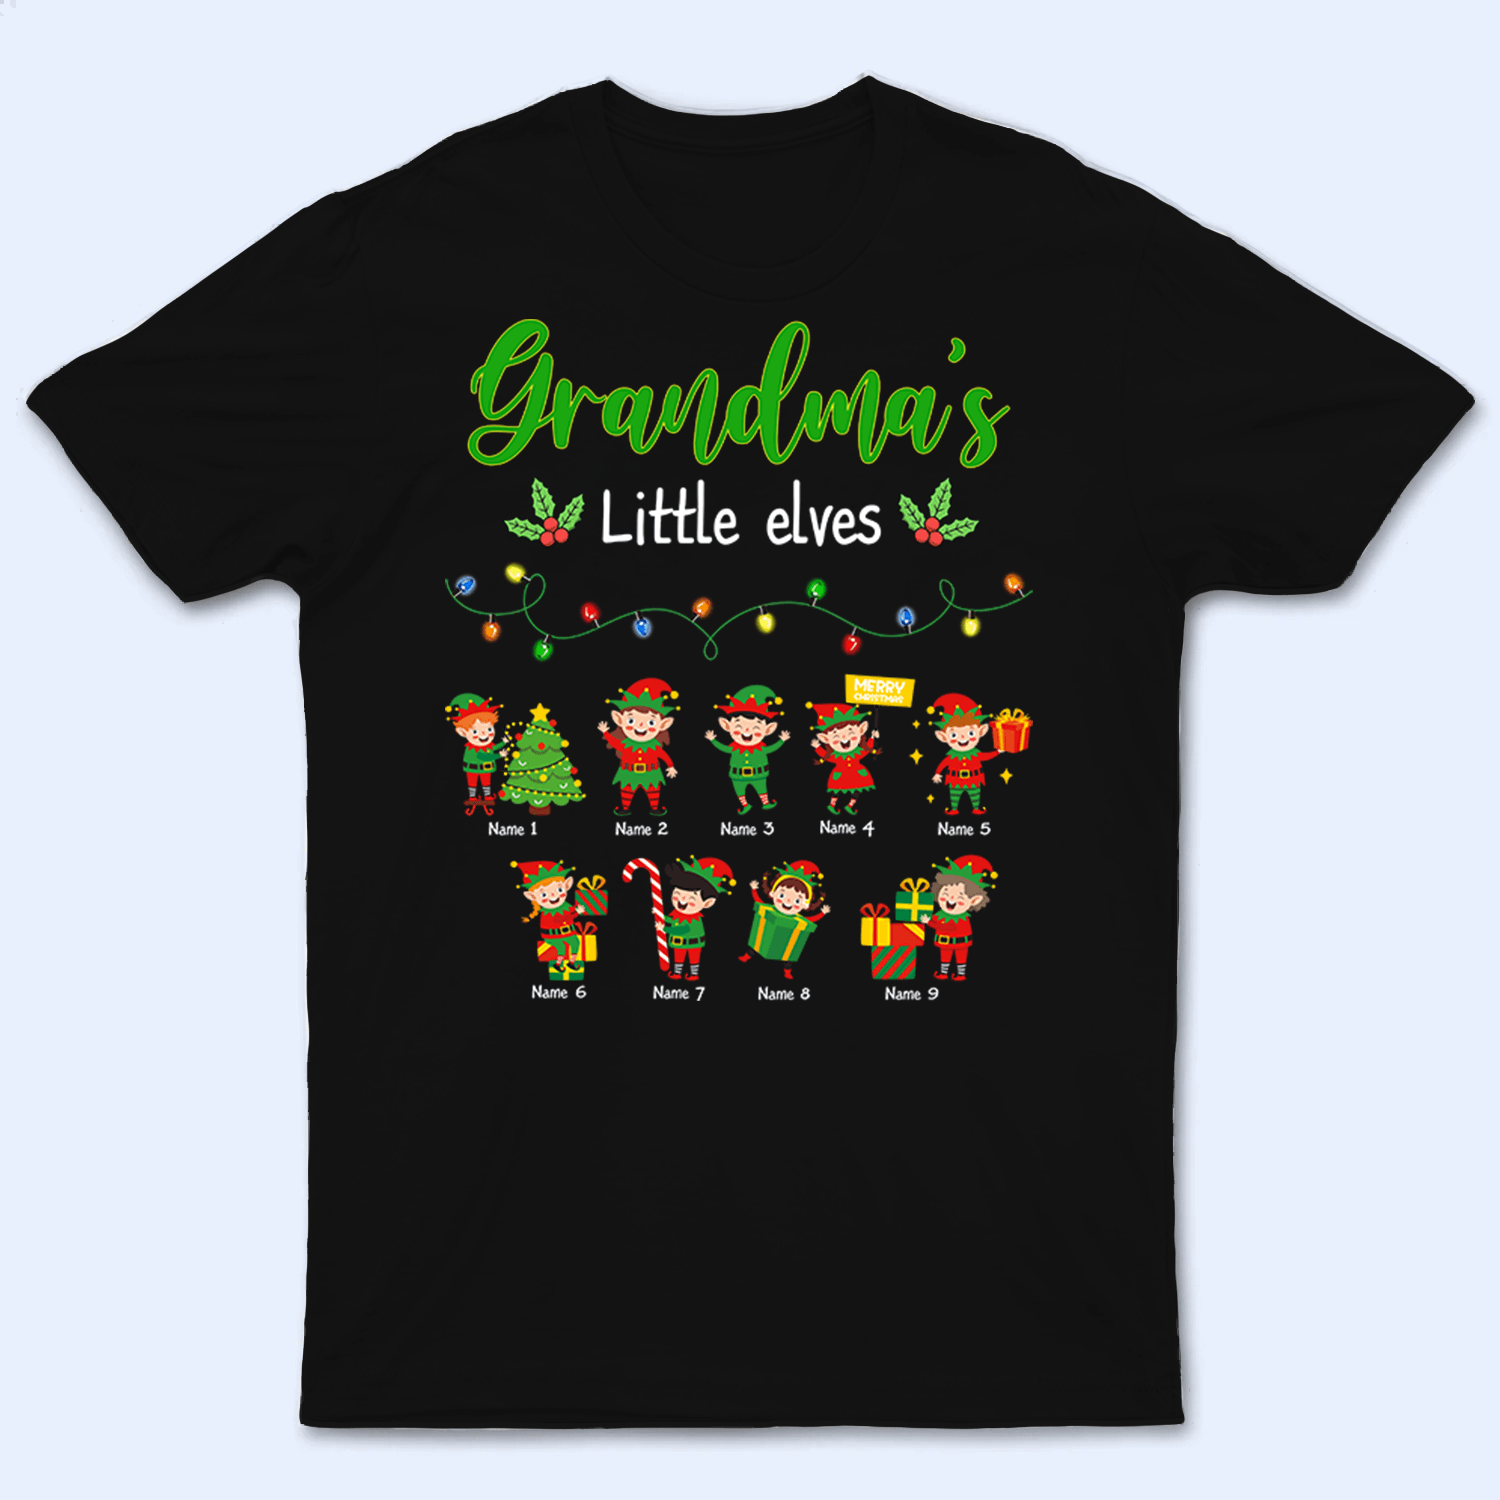 Grandma's Elves - Personalized Custom T Shirt - Birthday, Loving, Funny Gift for Grandfather/Dad/Father, Husband, Grandparent - Suzitee Store